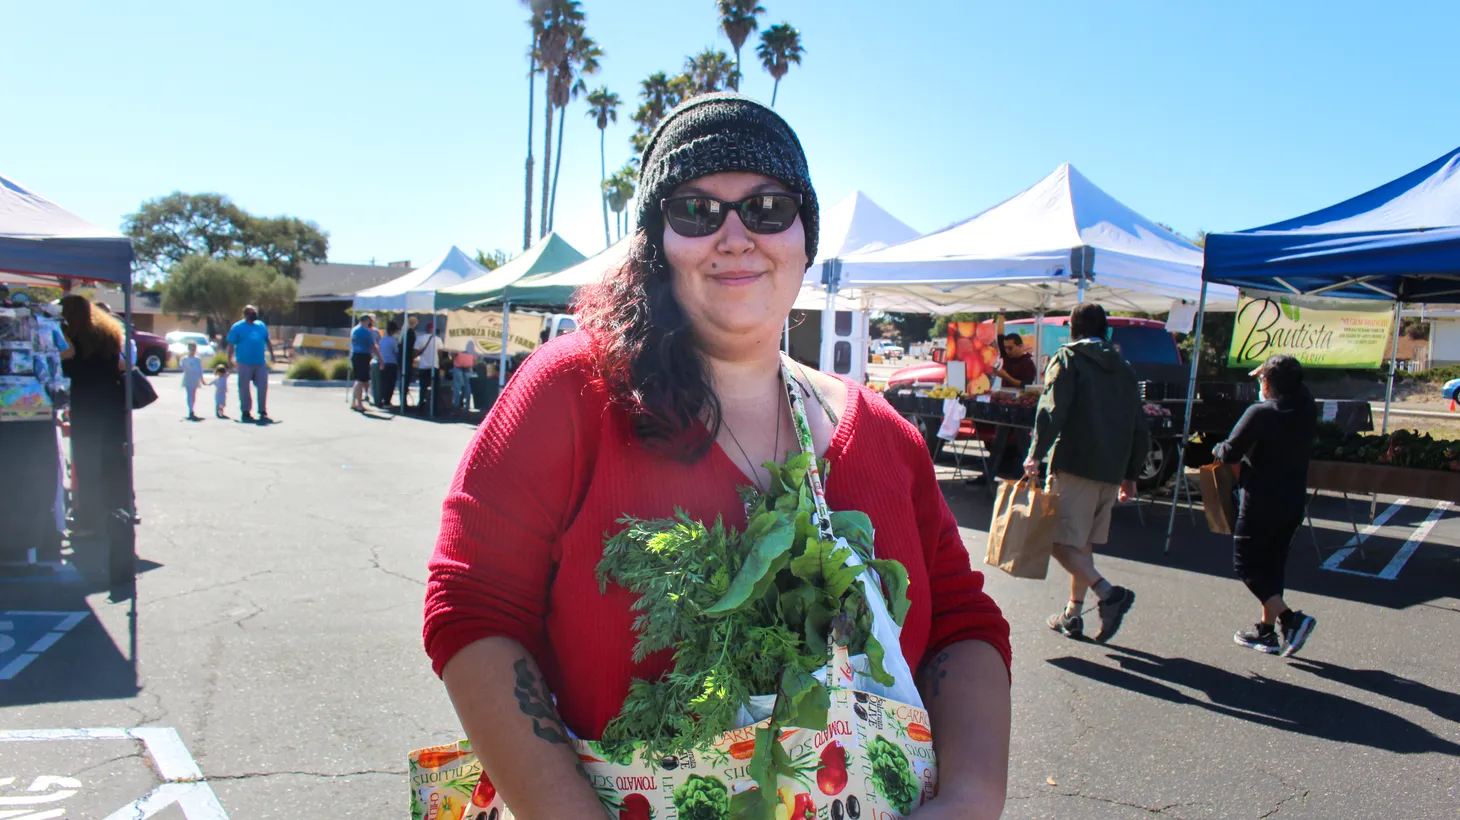 At participating farmers markets, low-income shoppers using their EBT cards get an extra $15 to spend on fruits and vegetables, thanks to a federal nutrition incentive program. “Being able to get organic vegetables is amazing,” says KC Ochoa.